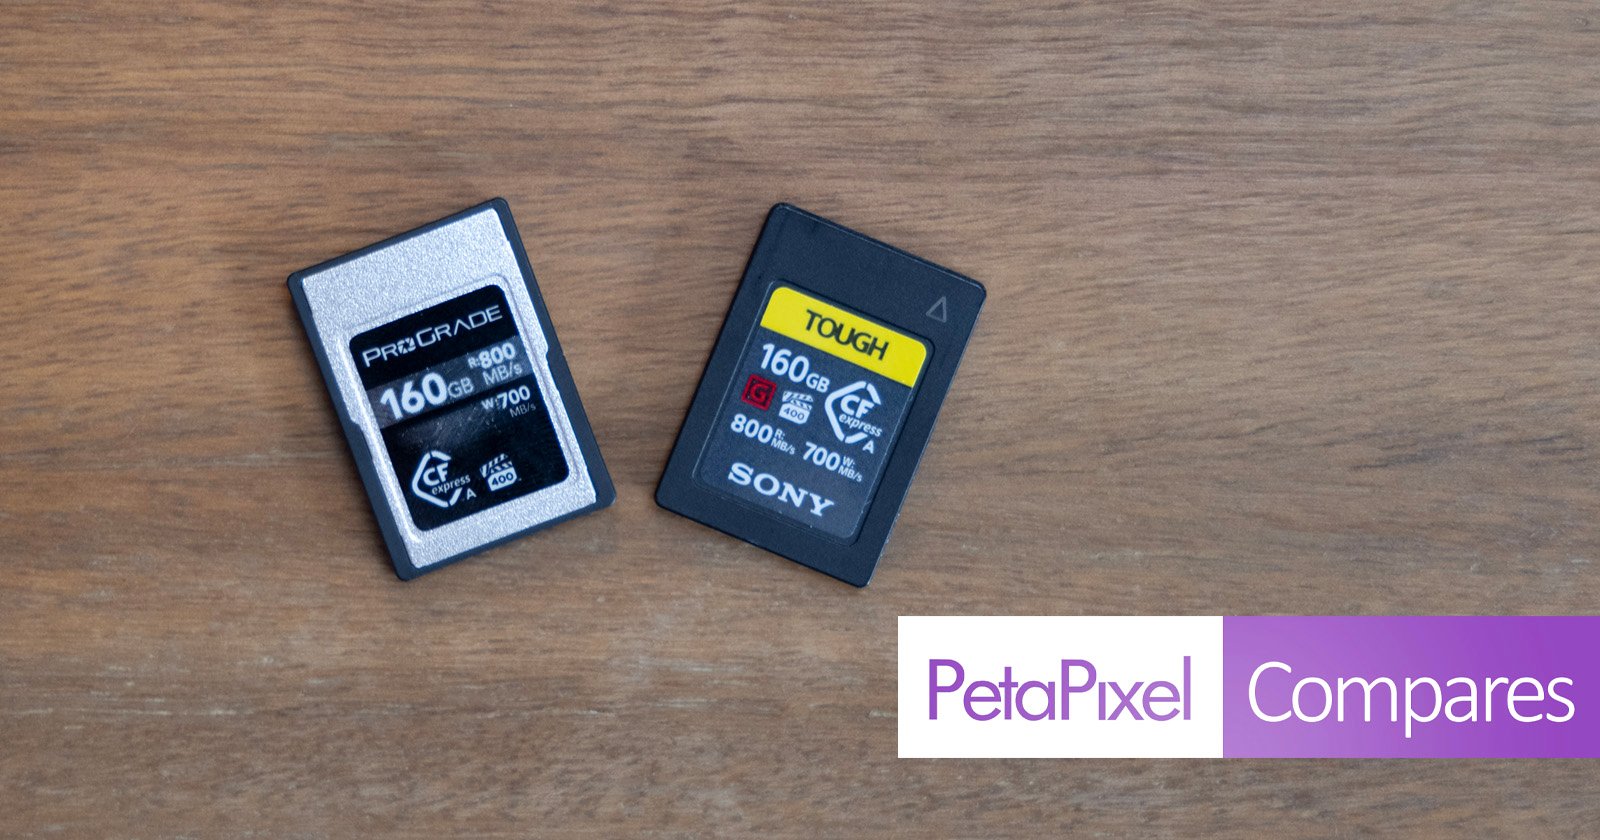 ProGrade Versus Sony CFexpress Type A Cards: Is There a Difference